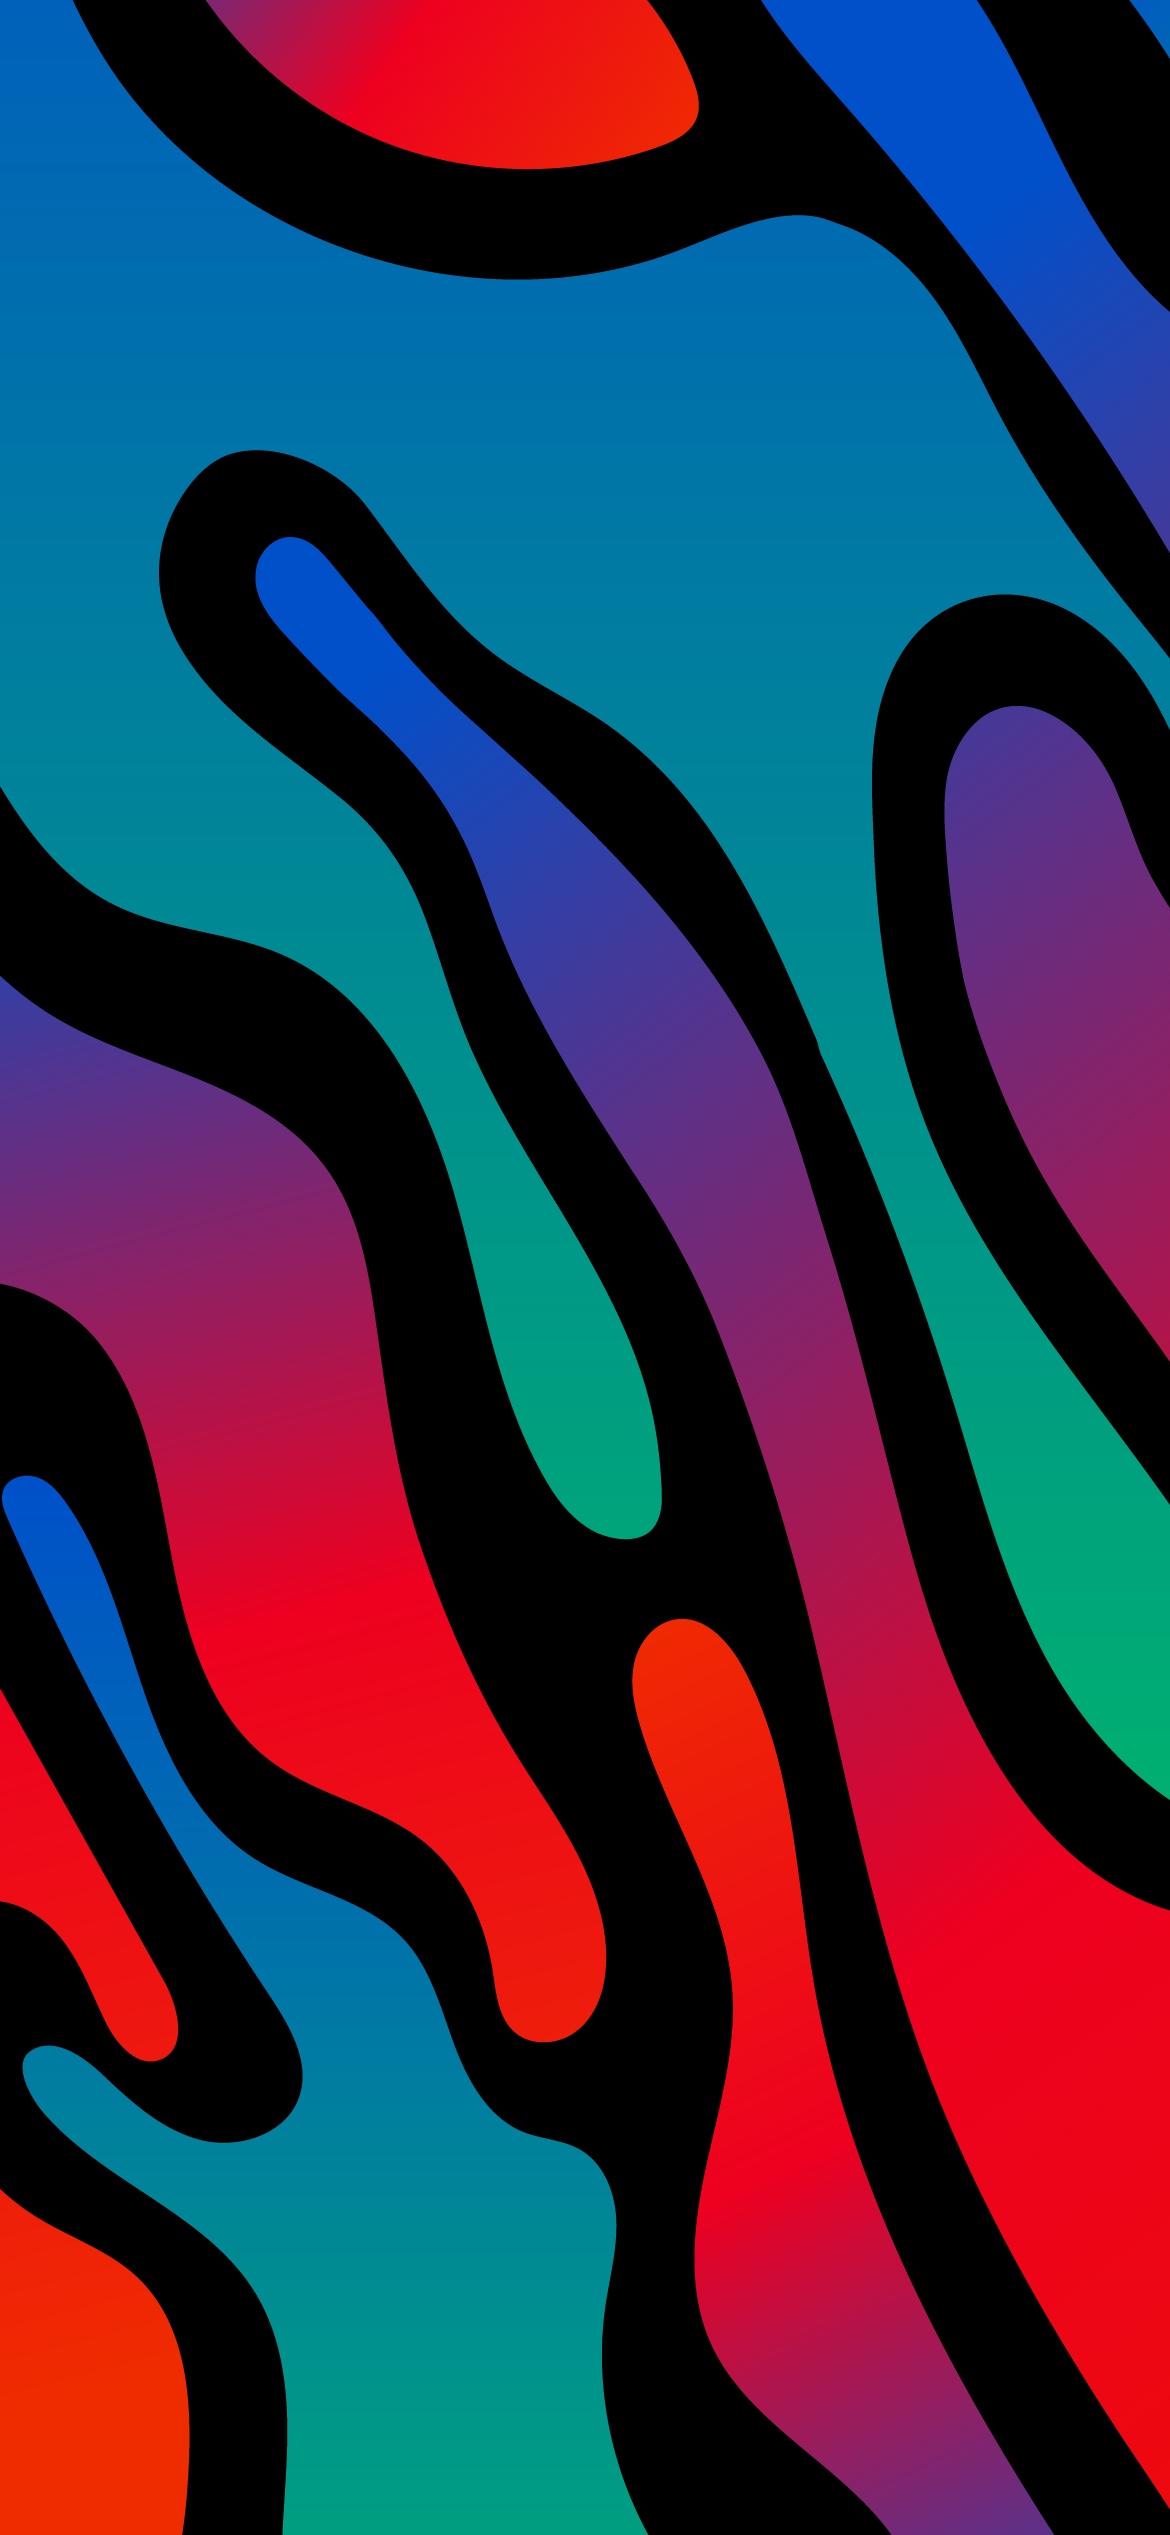 Colorful Snake 4K IPhone Wallpaper HD  IPhone Wallpapers  iPhone  Wallpapers